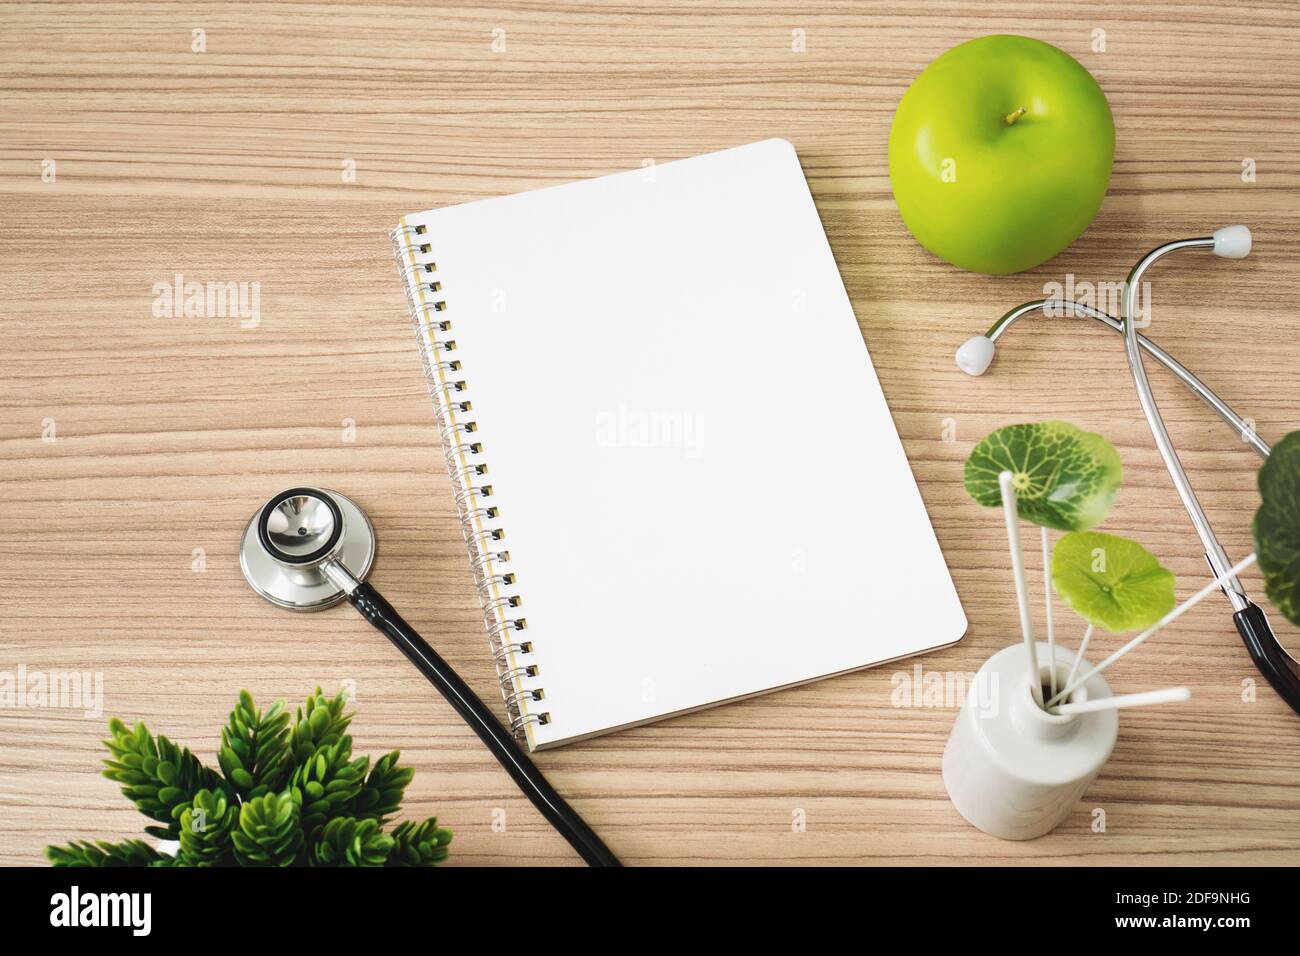 Stethoscope with notebook and apple fruits on wood background. Text copy space. Stock Photo